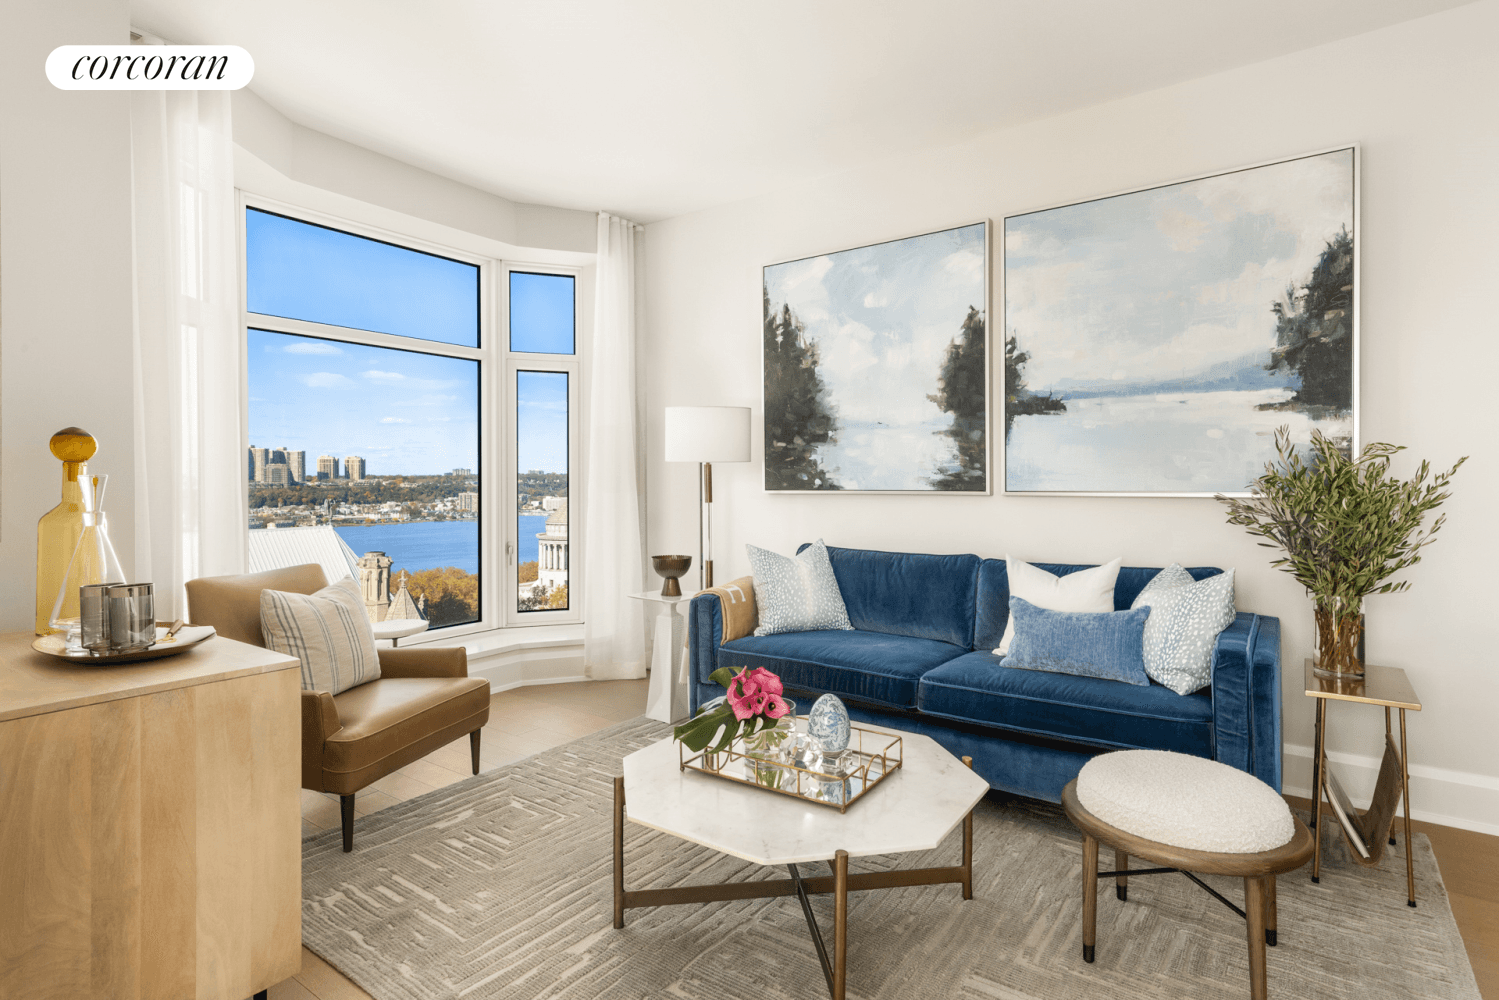 Boasting unobstructed eastern views and expansive windows, Residence 28D is a 713 square foot one bedroom home that receives plentiful light and air.